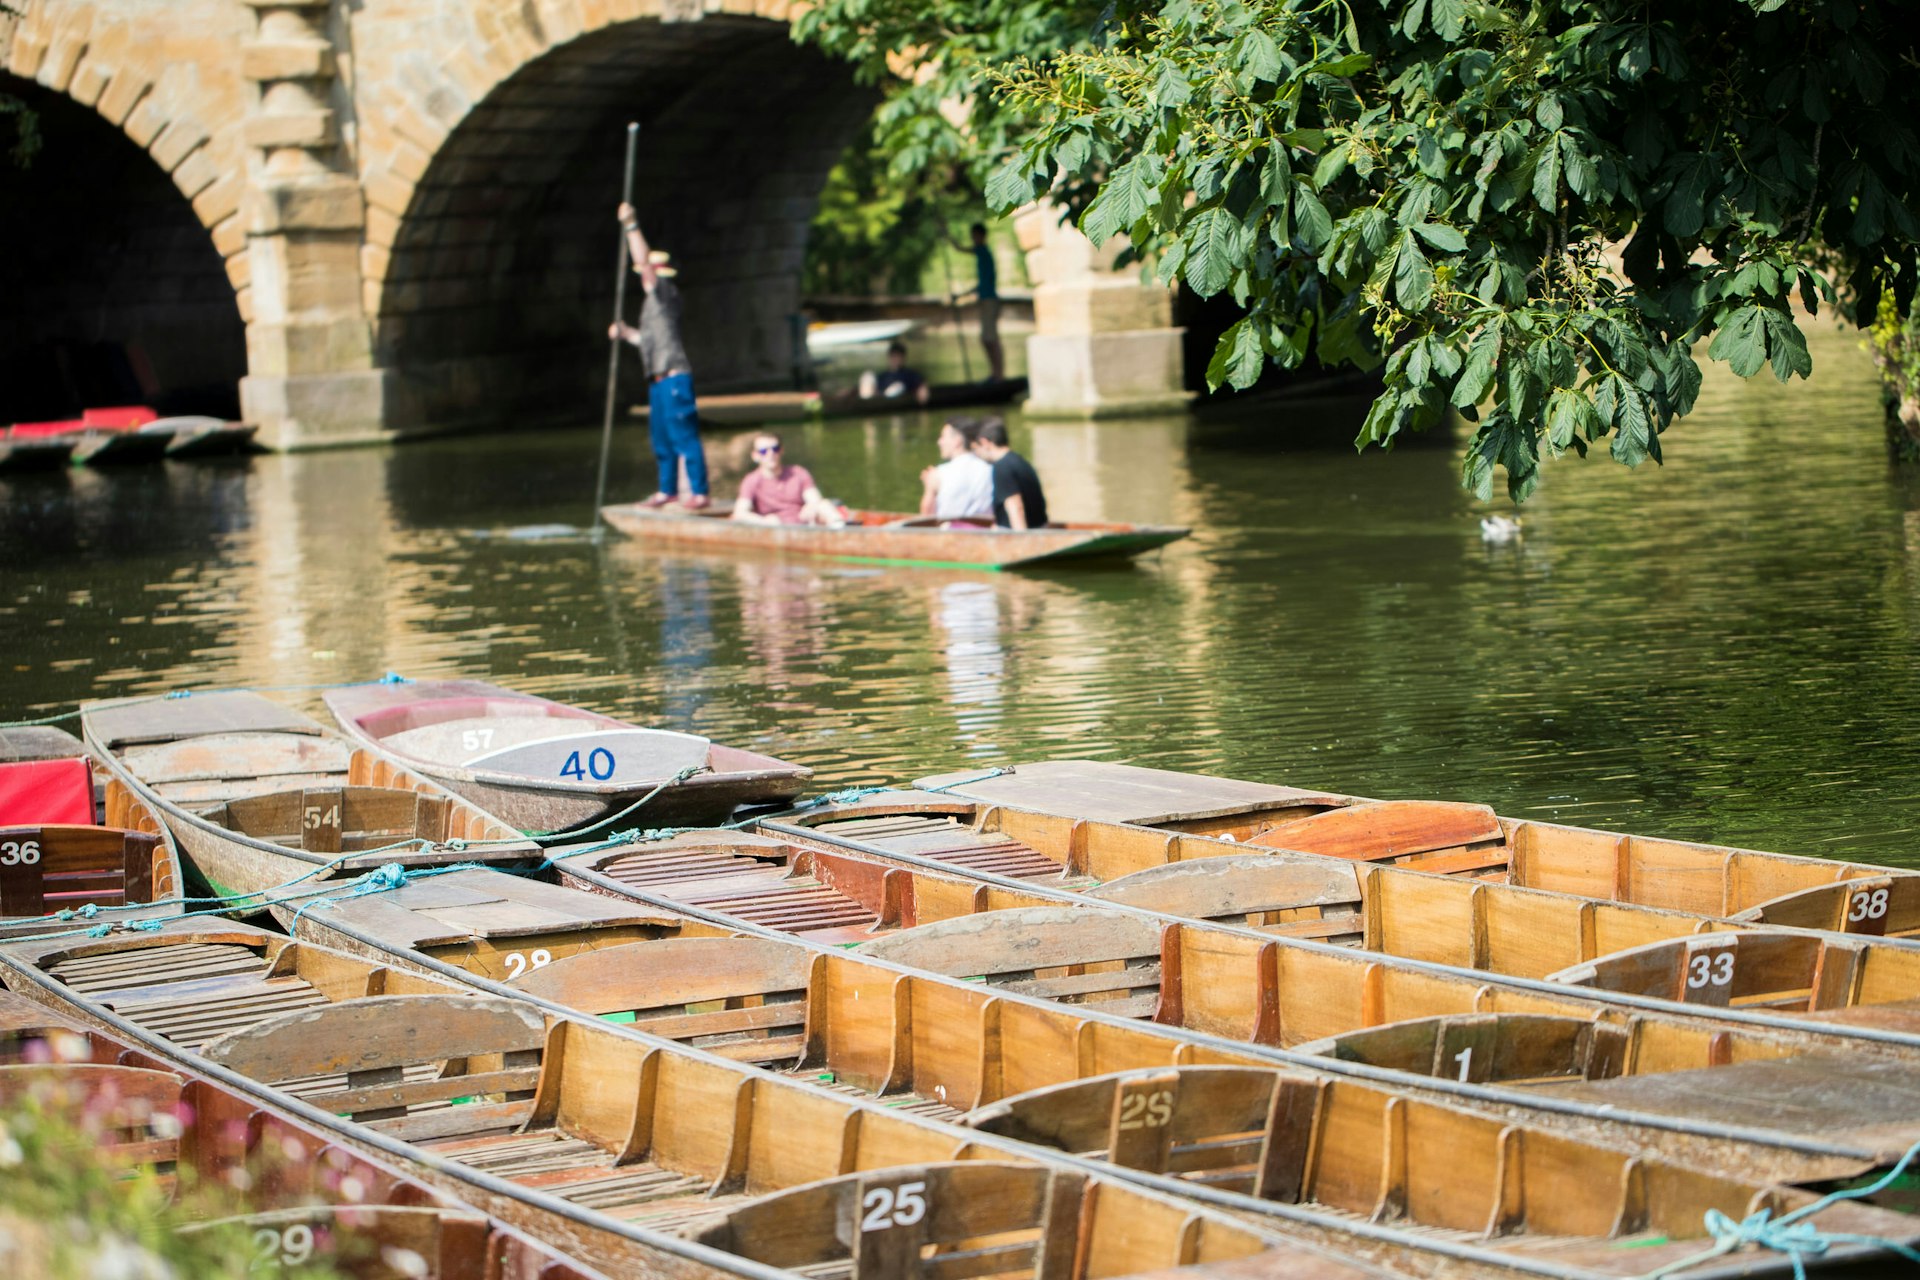 Punting in Oxford© Daisy Daisy / Shutterstock